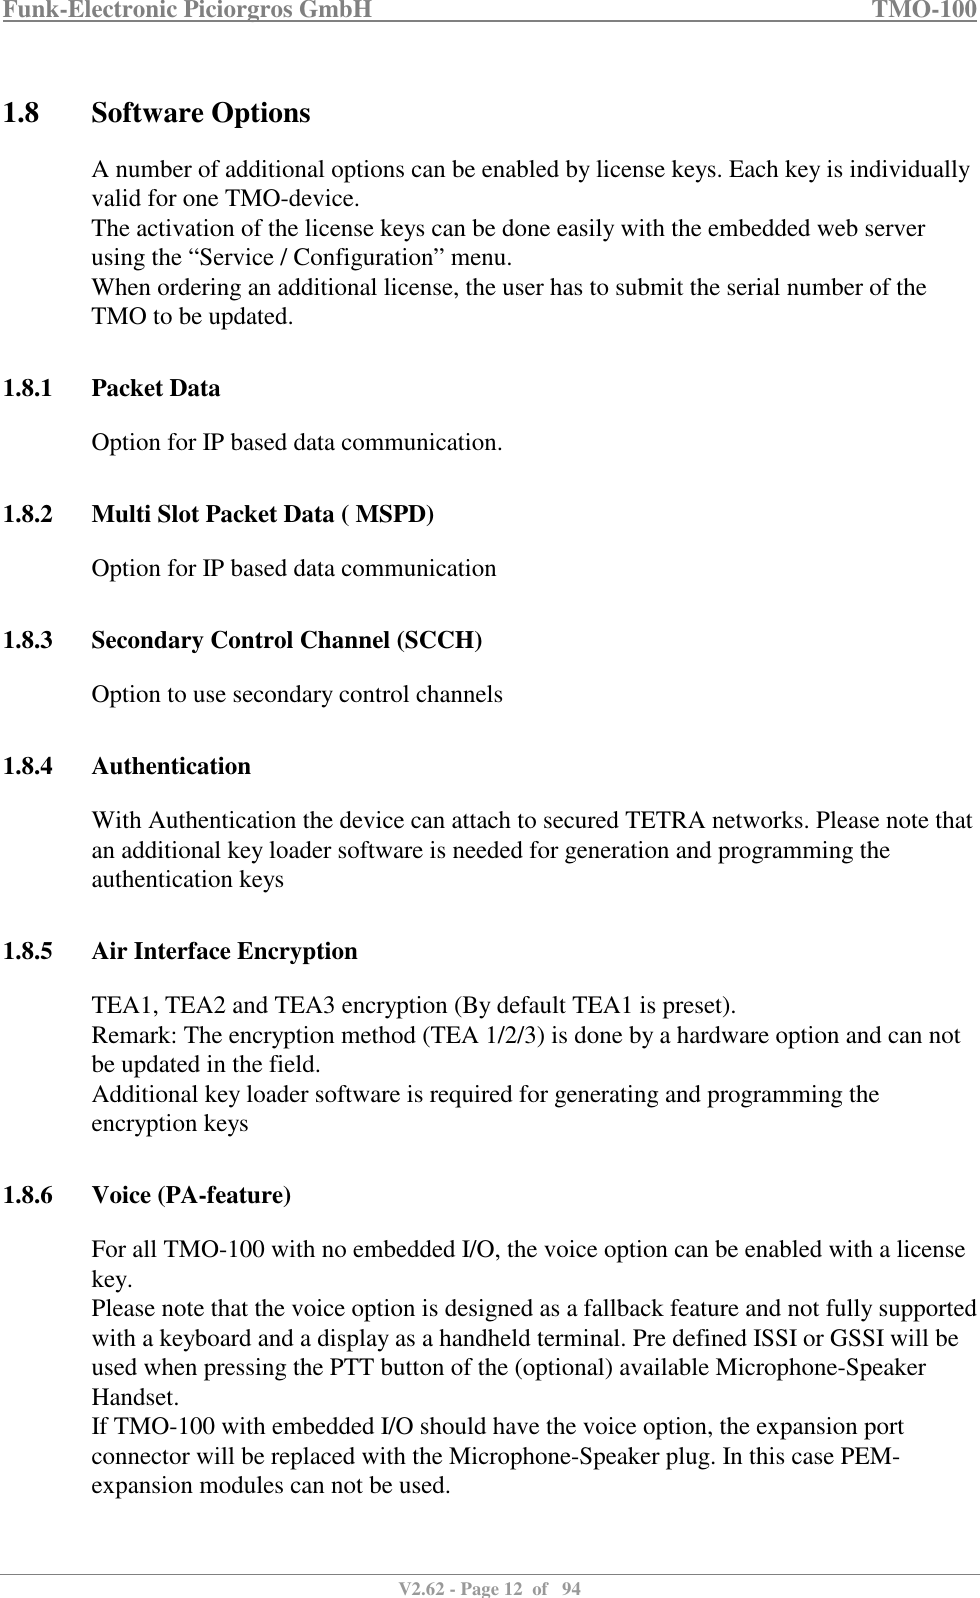 Funk-Electronic Piciorgros GmbH   TMO-100   V2.62 - Page 12  of   94   1.8 Software Options A number of additional options can be enabled by license keys. Each key is individually valid for one TMO-device.  The activation of the license keys can be done easily with the embedded web server using the “Service / Configuration” menu. When ordering an additional license, the user has to submit the serial number of the TMO to be updated.  1.8.1 Packet Data Option for IP based data communication.  1.8.2 Multi Slot Packet Data ( MSPD) Option for IP based data communication  1.8.3 Secondary Control Channel (SCCH) Option to use secondary control channels  1.8.4 Authentication With Authentication the device can attach to secured TETRA networks. Please note that an additional key loader software is needed for generation and programming the authentication keys  1.8.5 Air Interface Encryption TEA1, TEA2 and TEA3 encryption (By default TEA1 is preset).  Remark: The encryption method (TEA 1/2/3) is done by a hardware option and can not be updated in the field. Additional key loader software is required for generating and programming the encryption keys  1.8.6 Voice (PA-feature) For all TMO-100 with no embedded I/O, the voice option can be enabled with a license key.  Please note that the voice option is designed as a fallback feature and not fully supported with a keyboard and a display as a handheld terminal. Pre defined ISSI or GSSI will be used when pressing the PTT button of the (optional) available Microphone-Speaker Handset. If TMO-100 with embedded I/O should have the voice option, the expansion port connector will be replaced with the Microphone-Speaker plug. In this case PEM-expansion modules can not be used.  